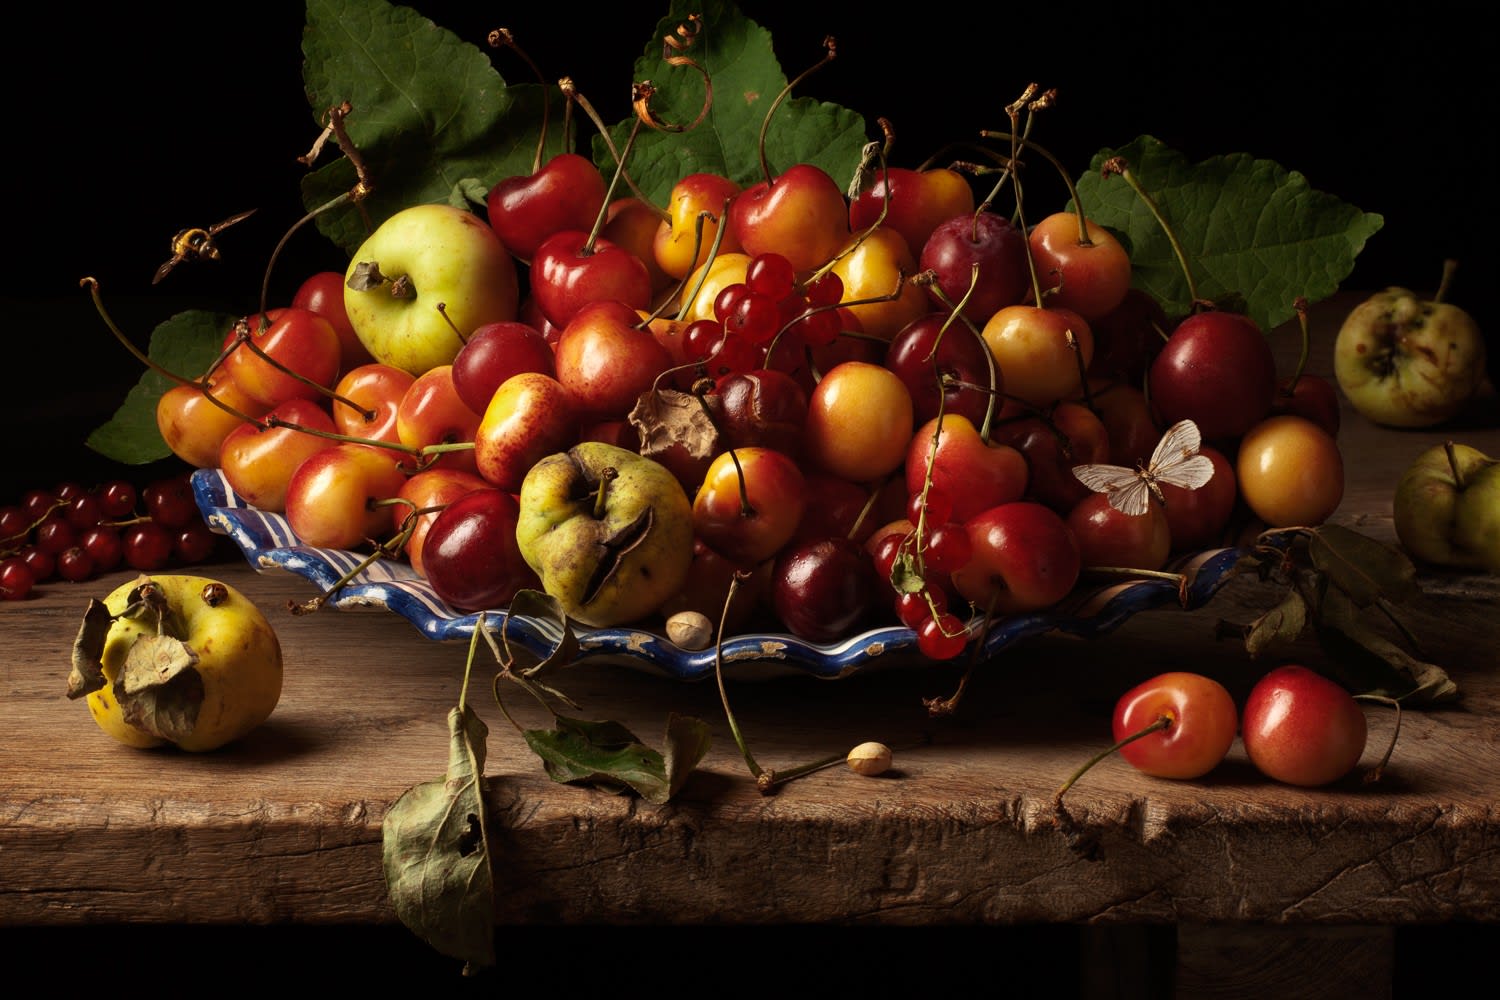 Paulette Tavormina, Yellow Cherries and Crab Apples, After G.G., 2011